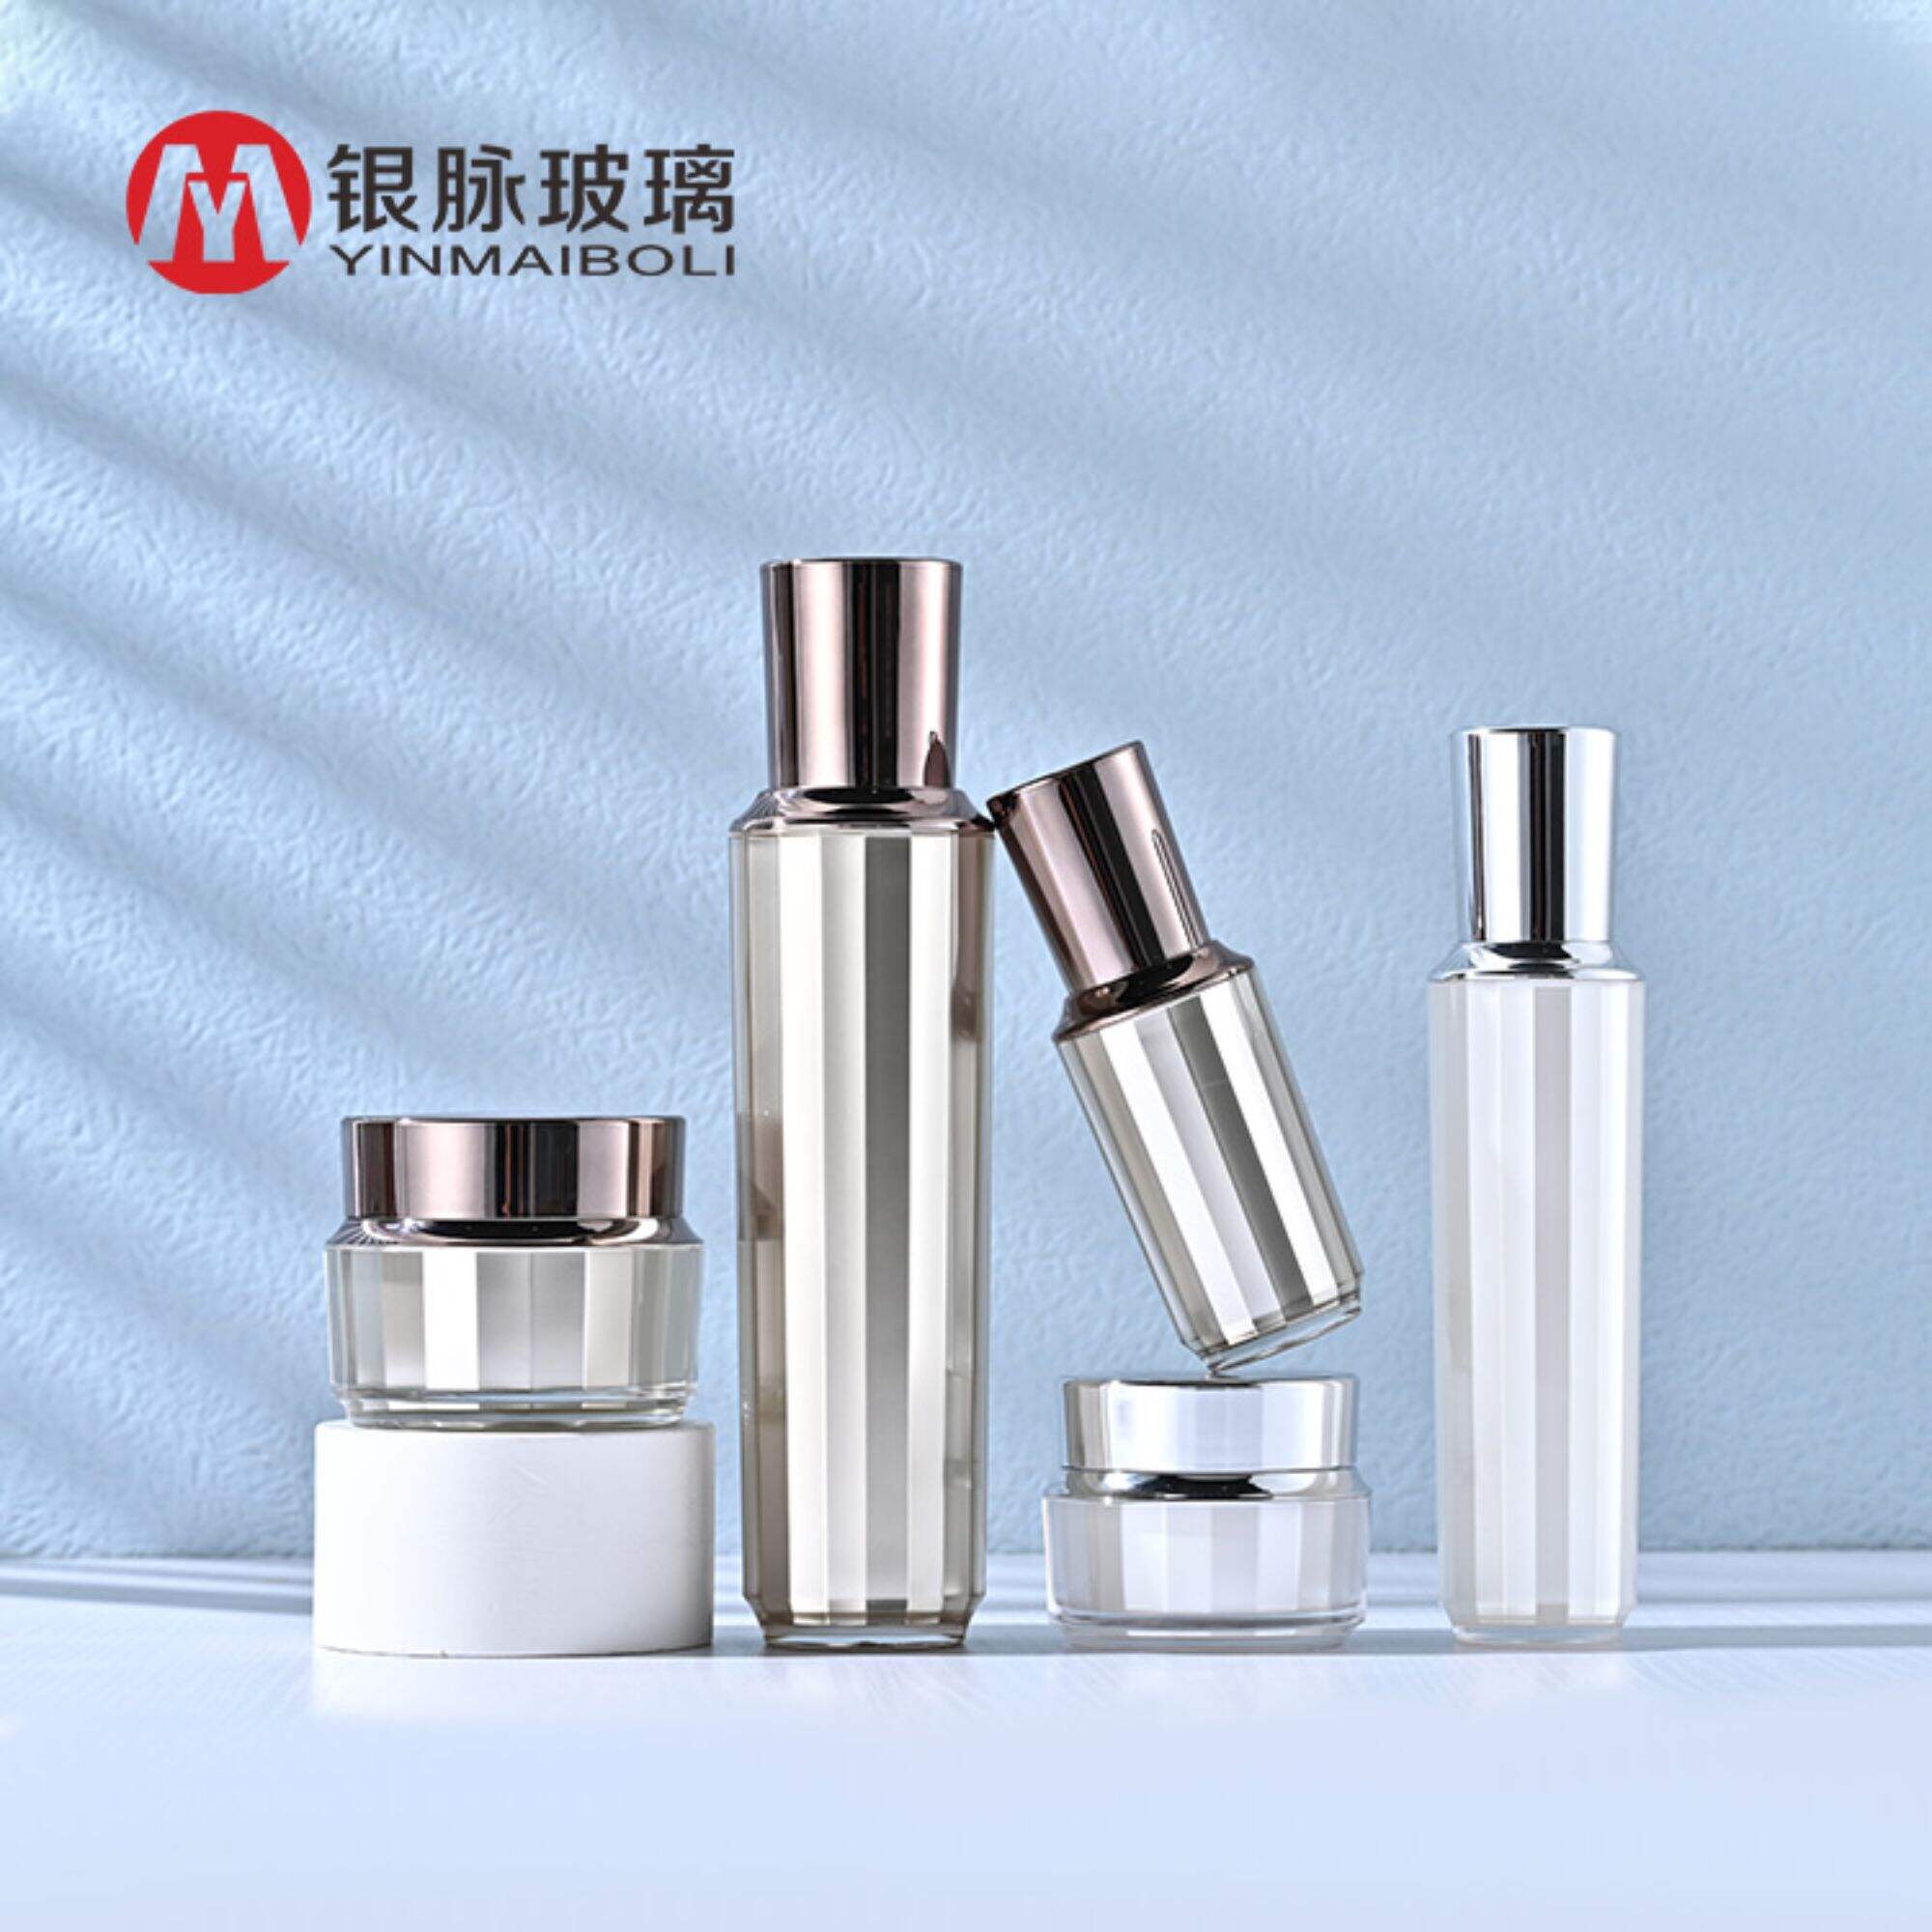 Cosmetics Packaging Sets Acrylic Jar and Plastic Bottle Custom Clear polygon body with lids for cream skin care products